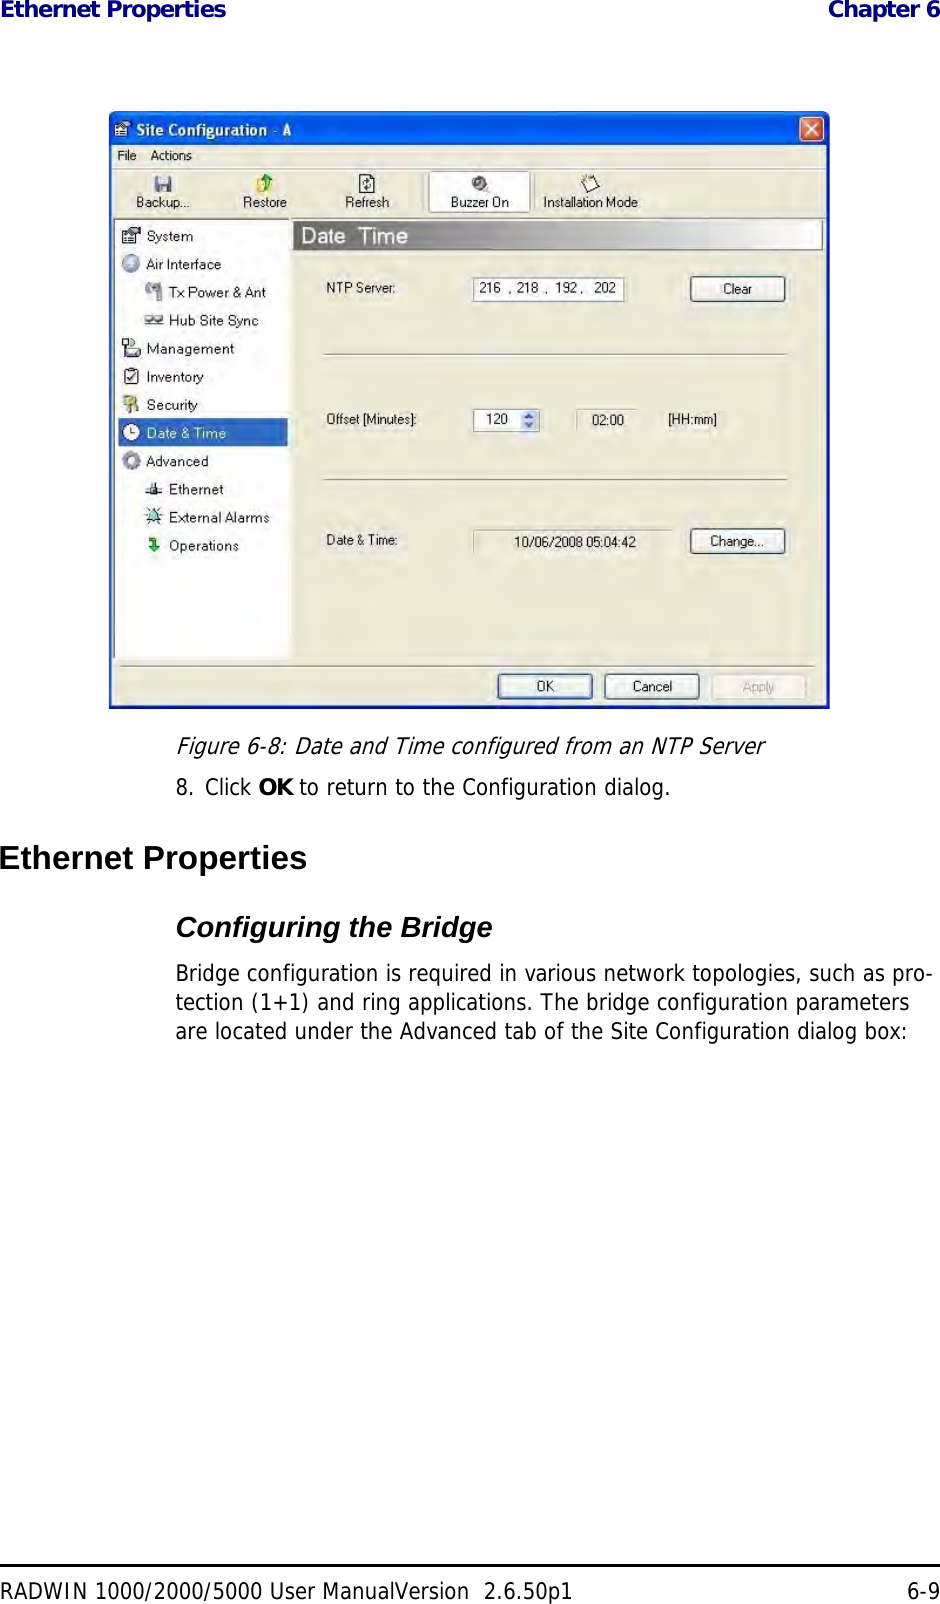 Ethernet Properties  Chapter 6RADWIN 1000/2000/5000 User ManualVersion  2.6.50p1 6-9Figure 6-8: Date and Time configured from an NTP Server8. Click OK to return to the Configuration dialog.Ethernet PropertiesConfiguring the Bridge Bridge configuration is required in various network topologies, such as pro-tection (1+1) and ring applications. The bridge configuration parameters are located under the Advanced tab of the Site Configuration dialog box: